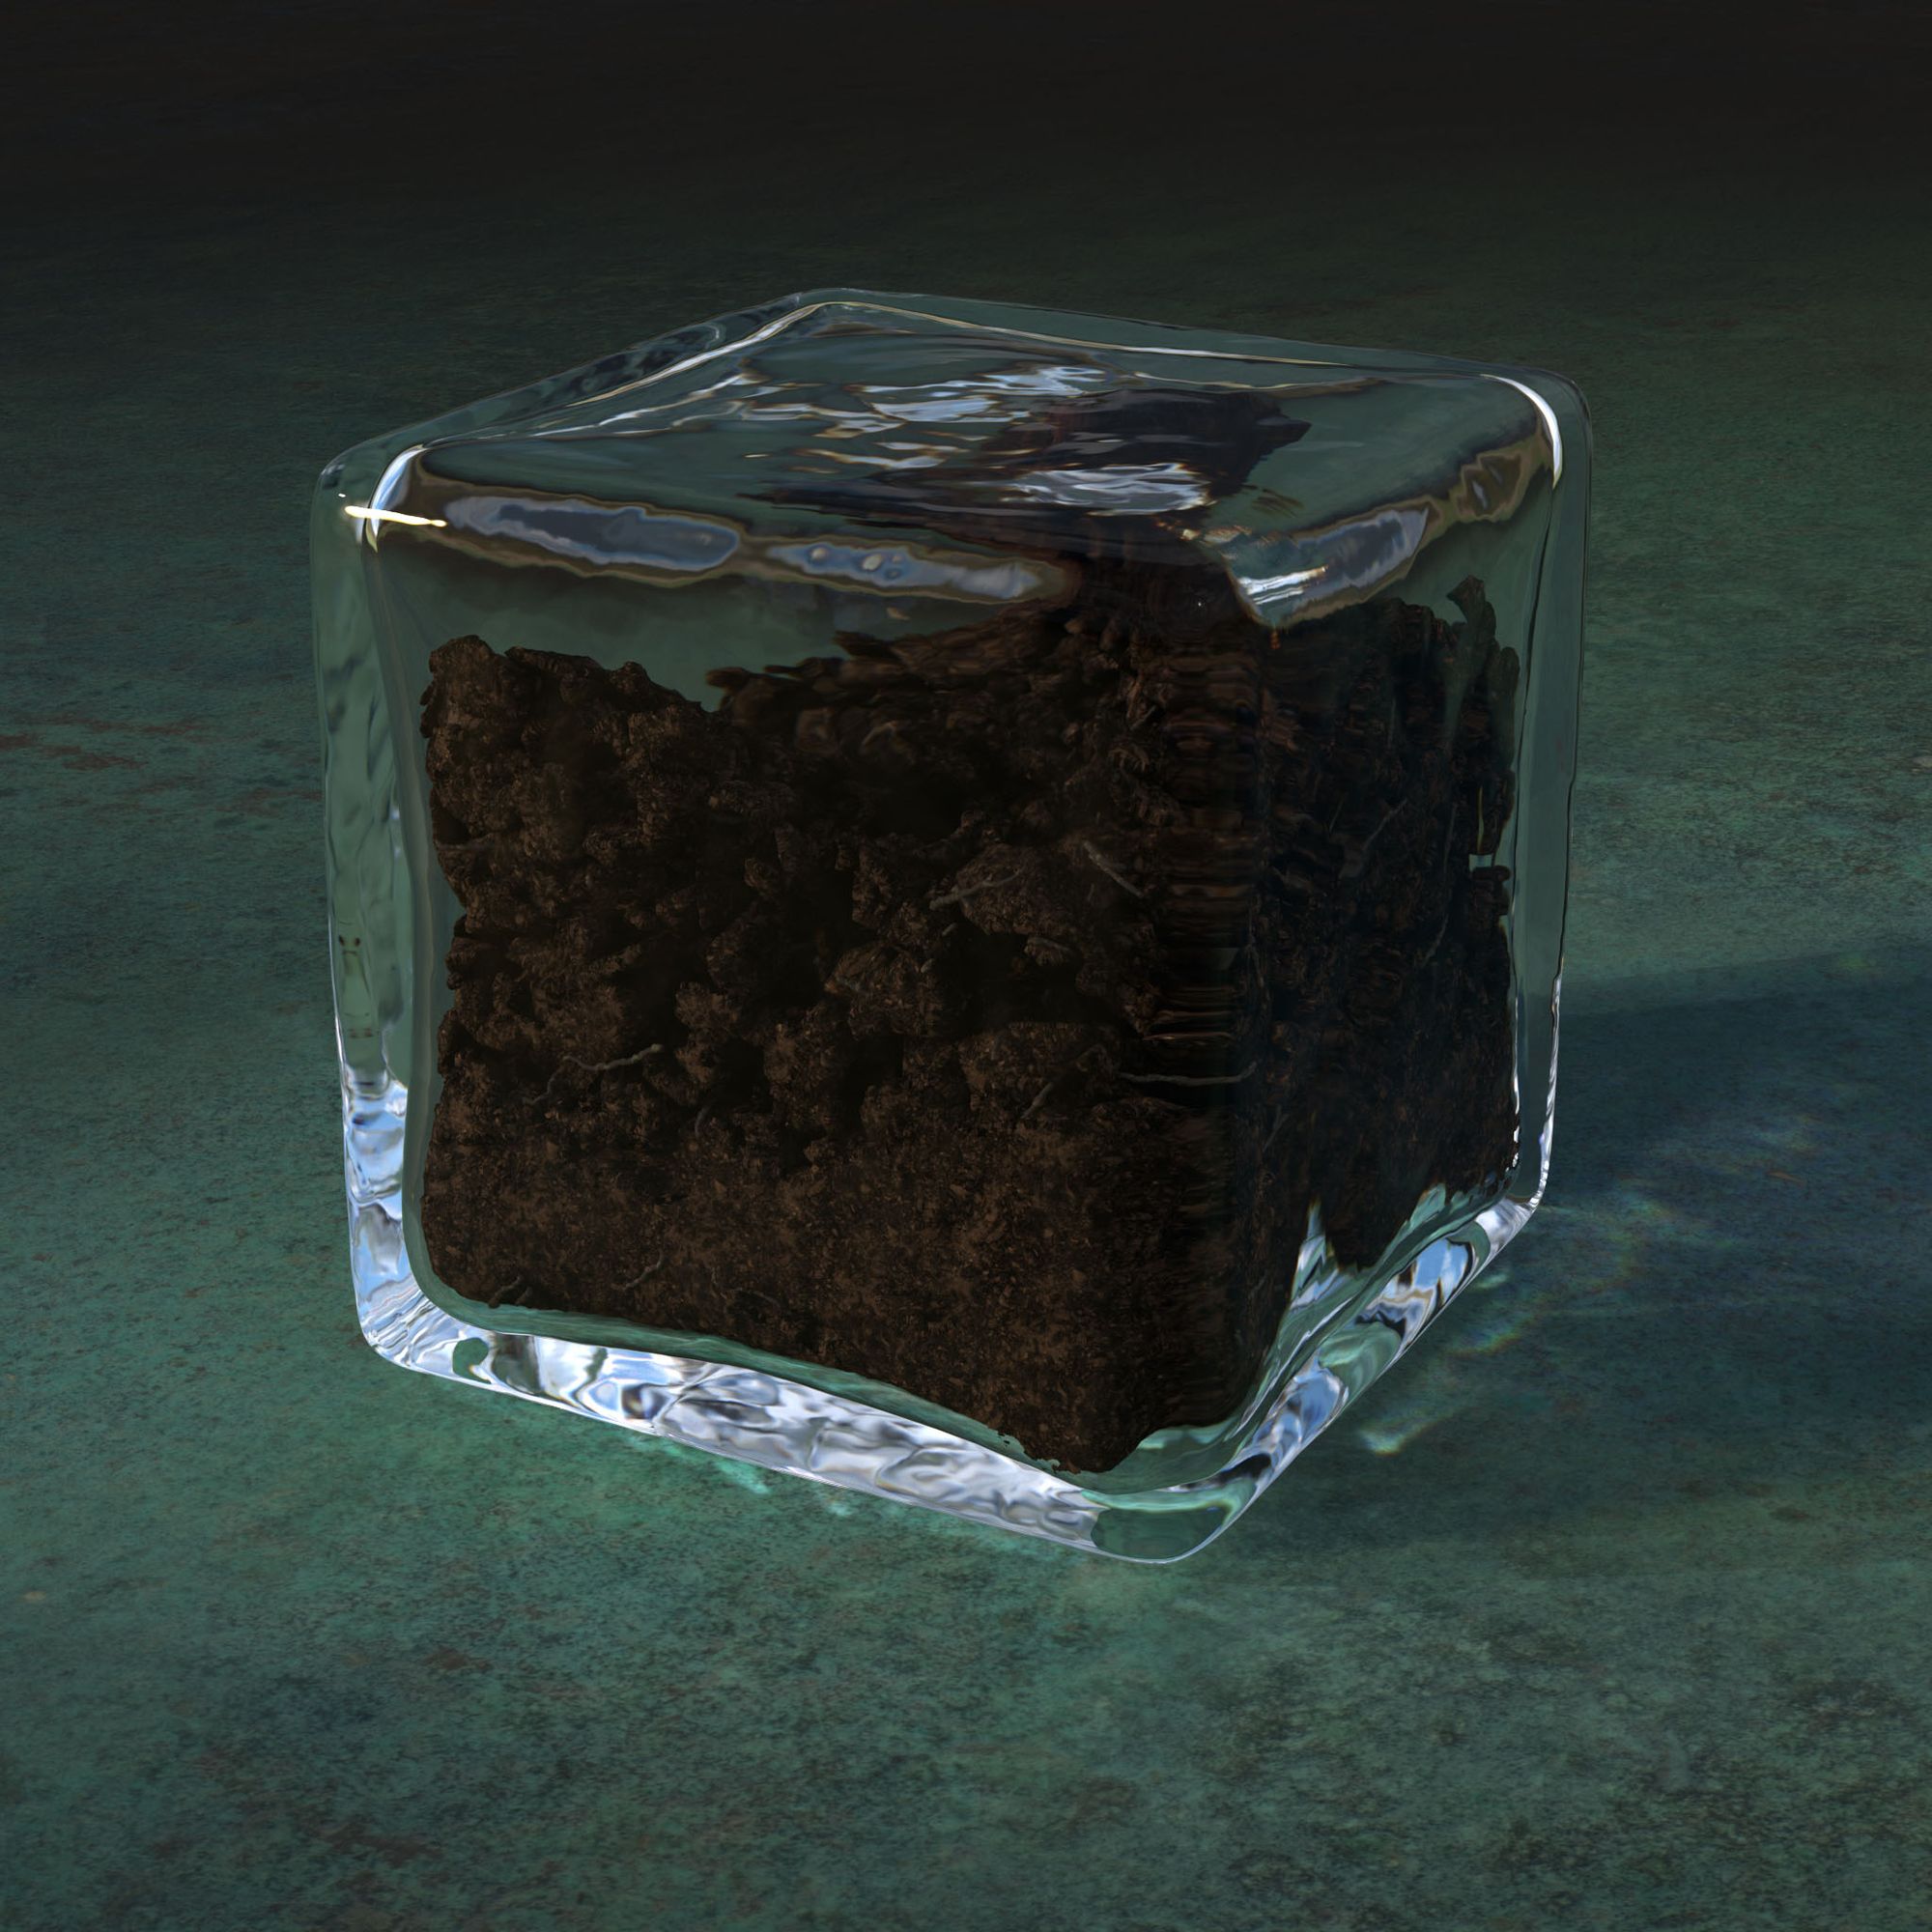 Photorealistic render of a glass block with thick and imperfect walls, mostly filled with a chunky dark, nearly black, soil. Caustics and refraction scatter light through the block and onto a floor like rusted copper.